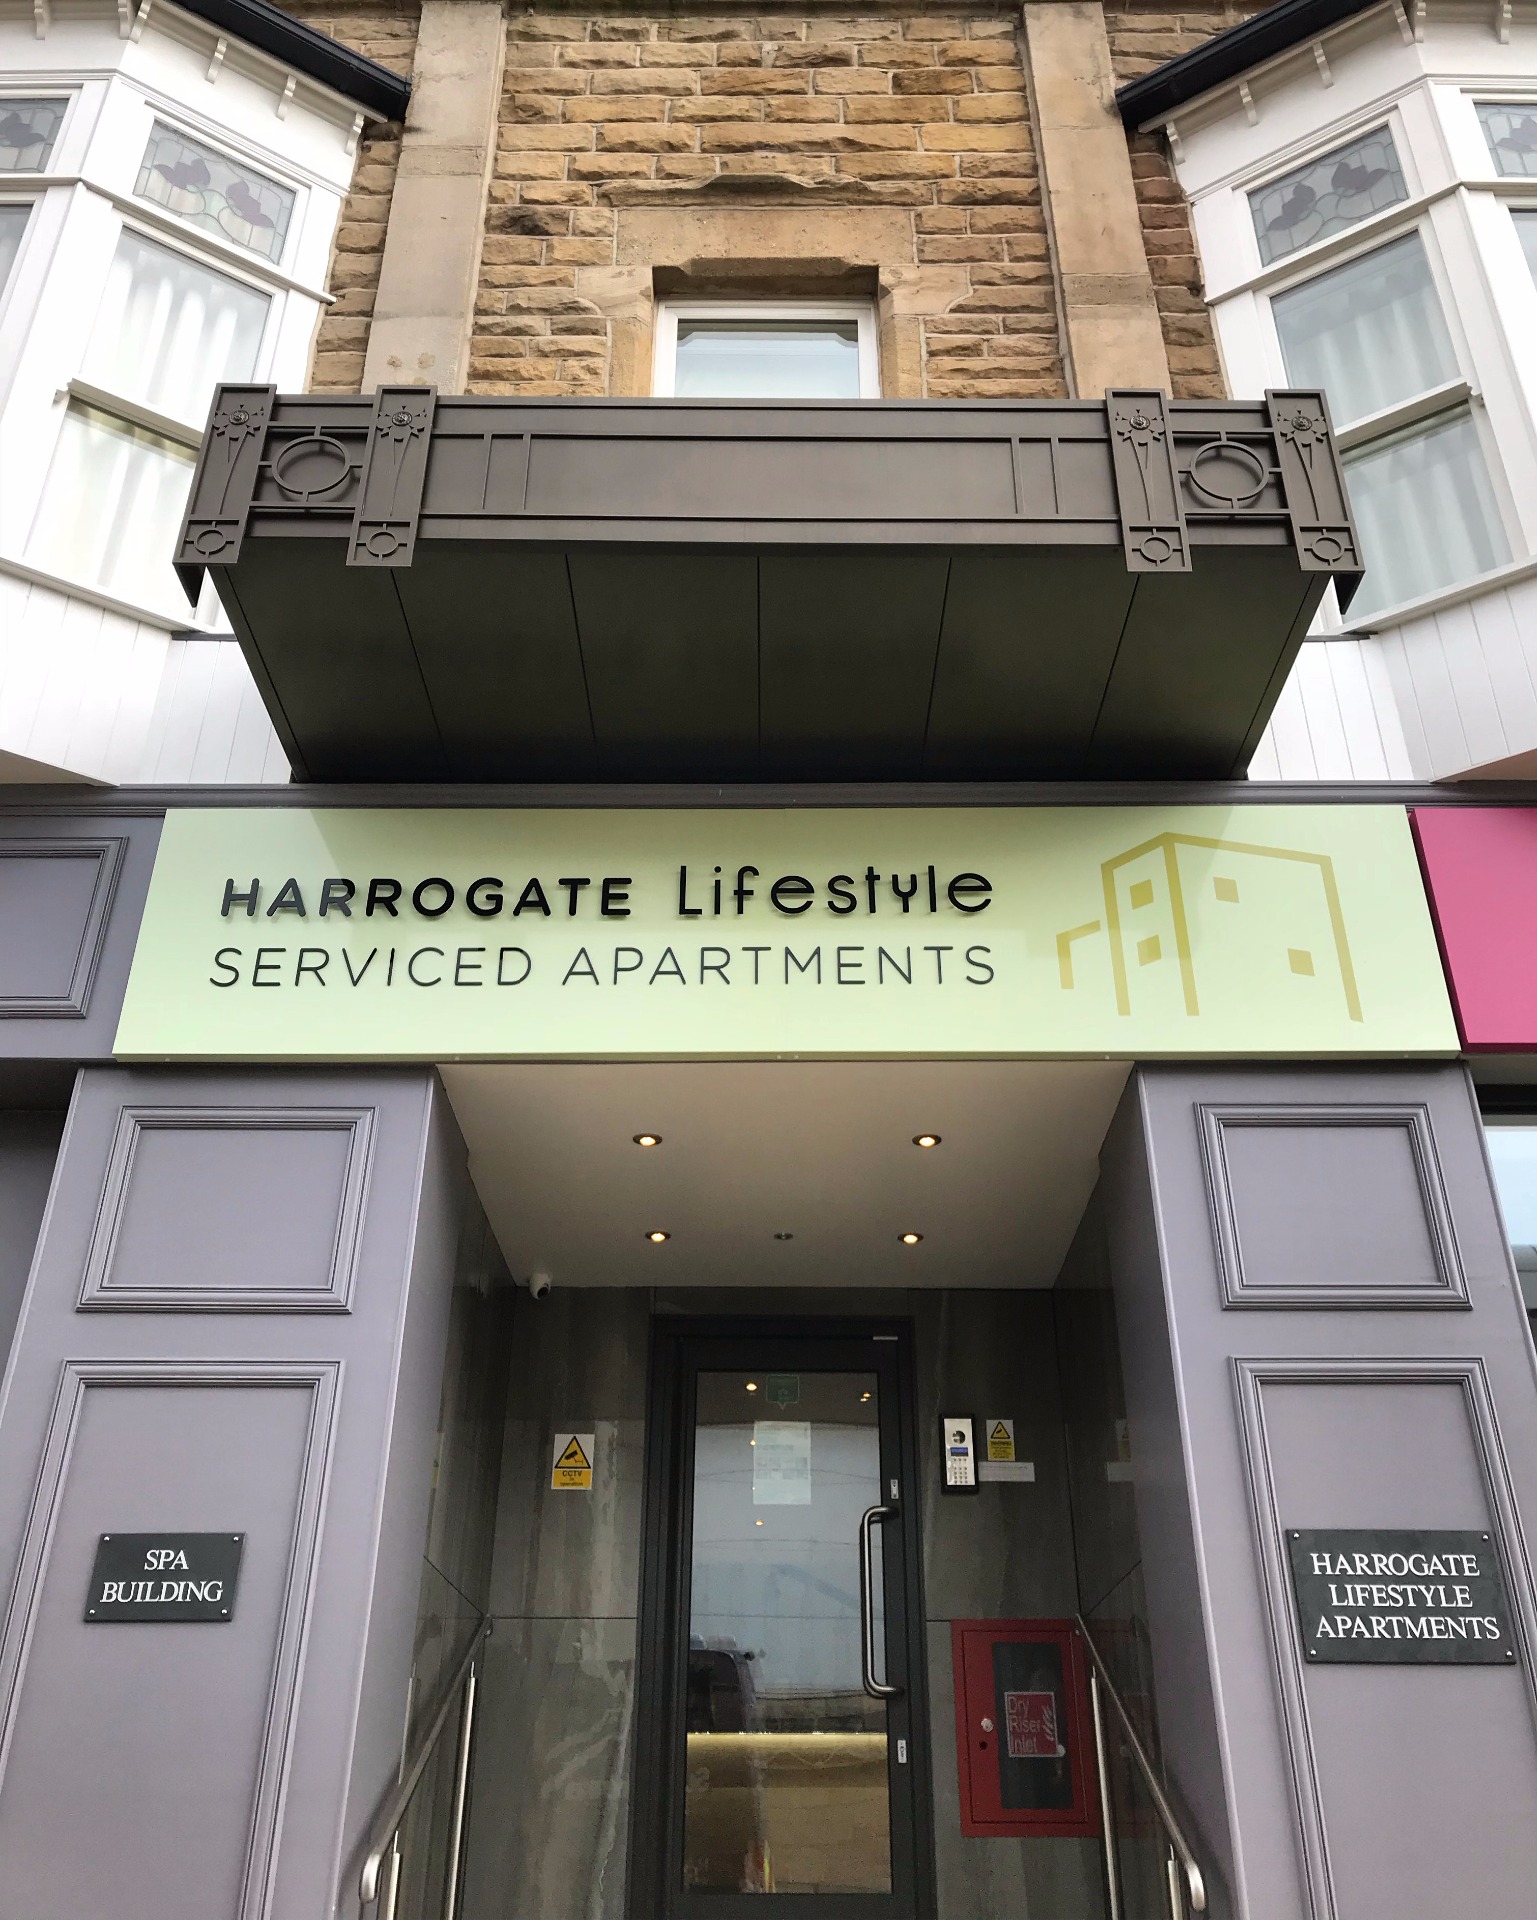 Harrogate Lifestyle Serviced Apartments opposite the International Convention Centre accommodation entrance